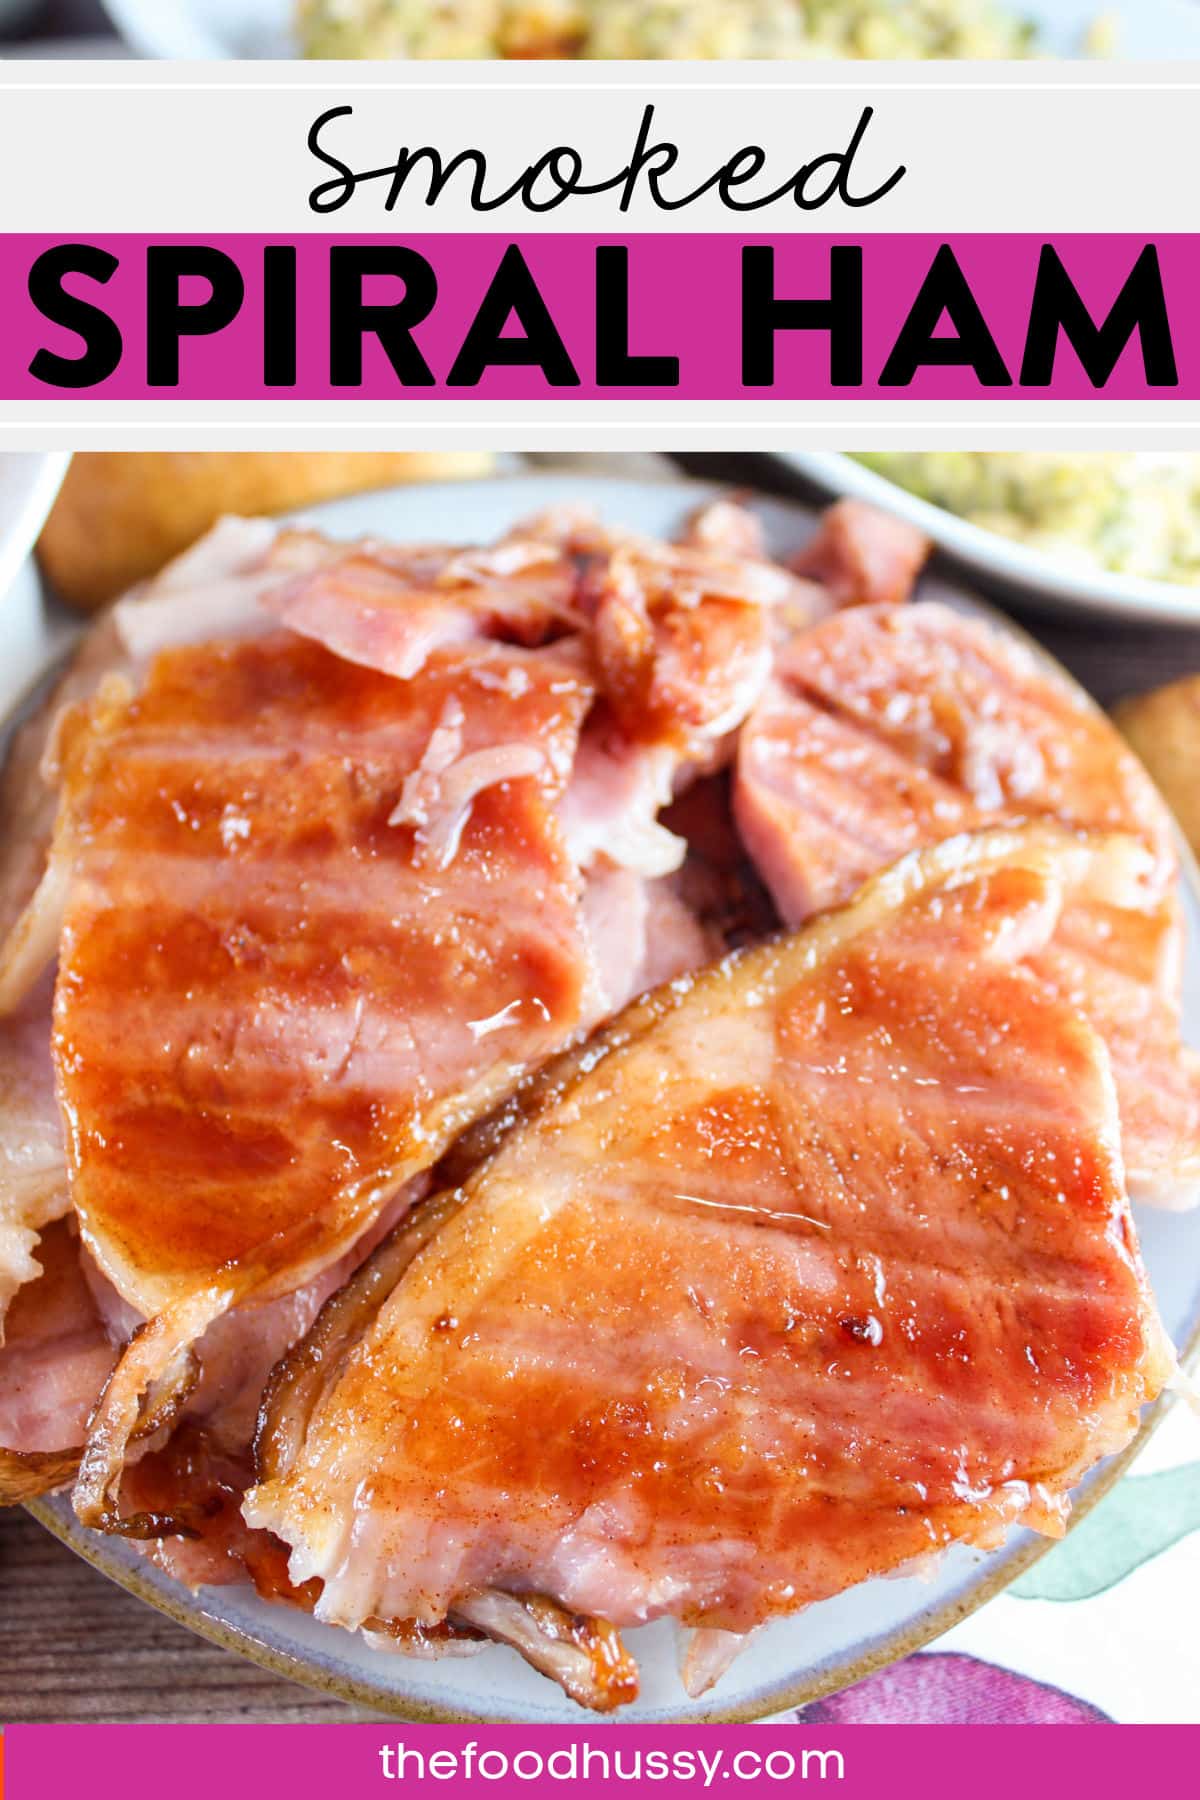 Spiral Smoked Ham is always a favorite holiday meal - because it's easy and delicious. Plus there are so many uses for leftover ham! This classic brown sugar glaze will be a favorite as well! via @foodhussy